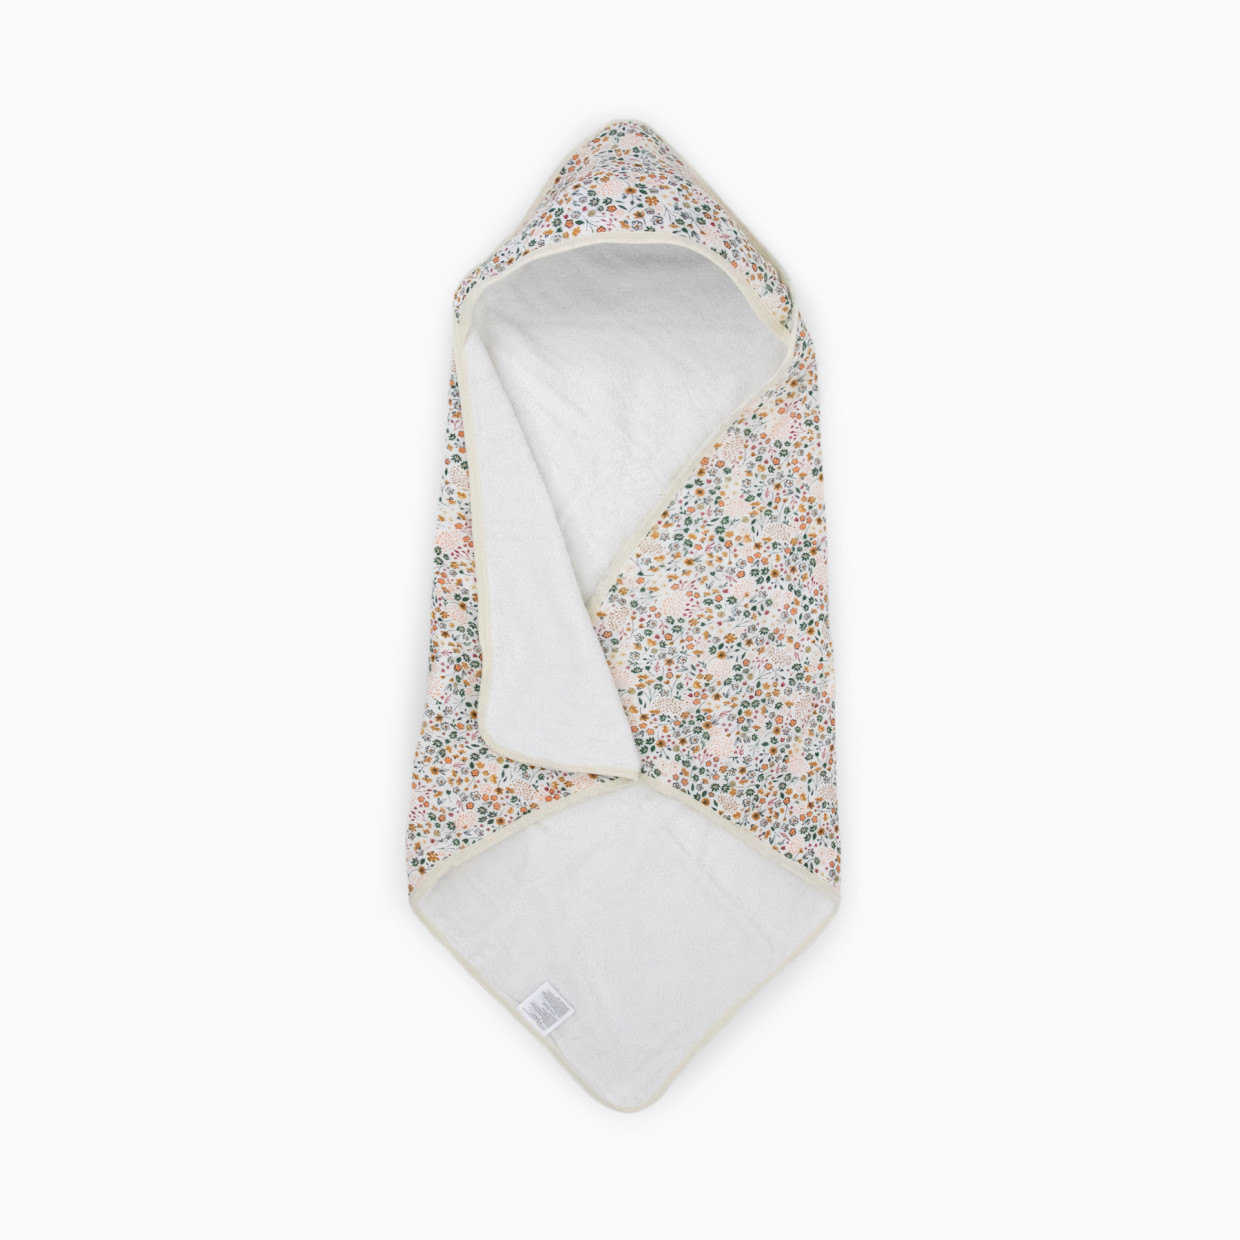 Little Unicorn Cotton Muslin & Terry Infant Hooded Towel - Pressed Petals.